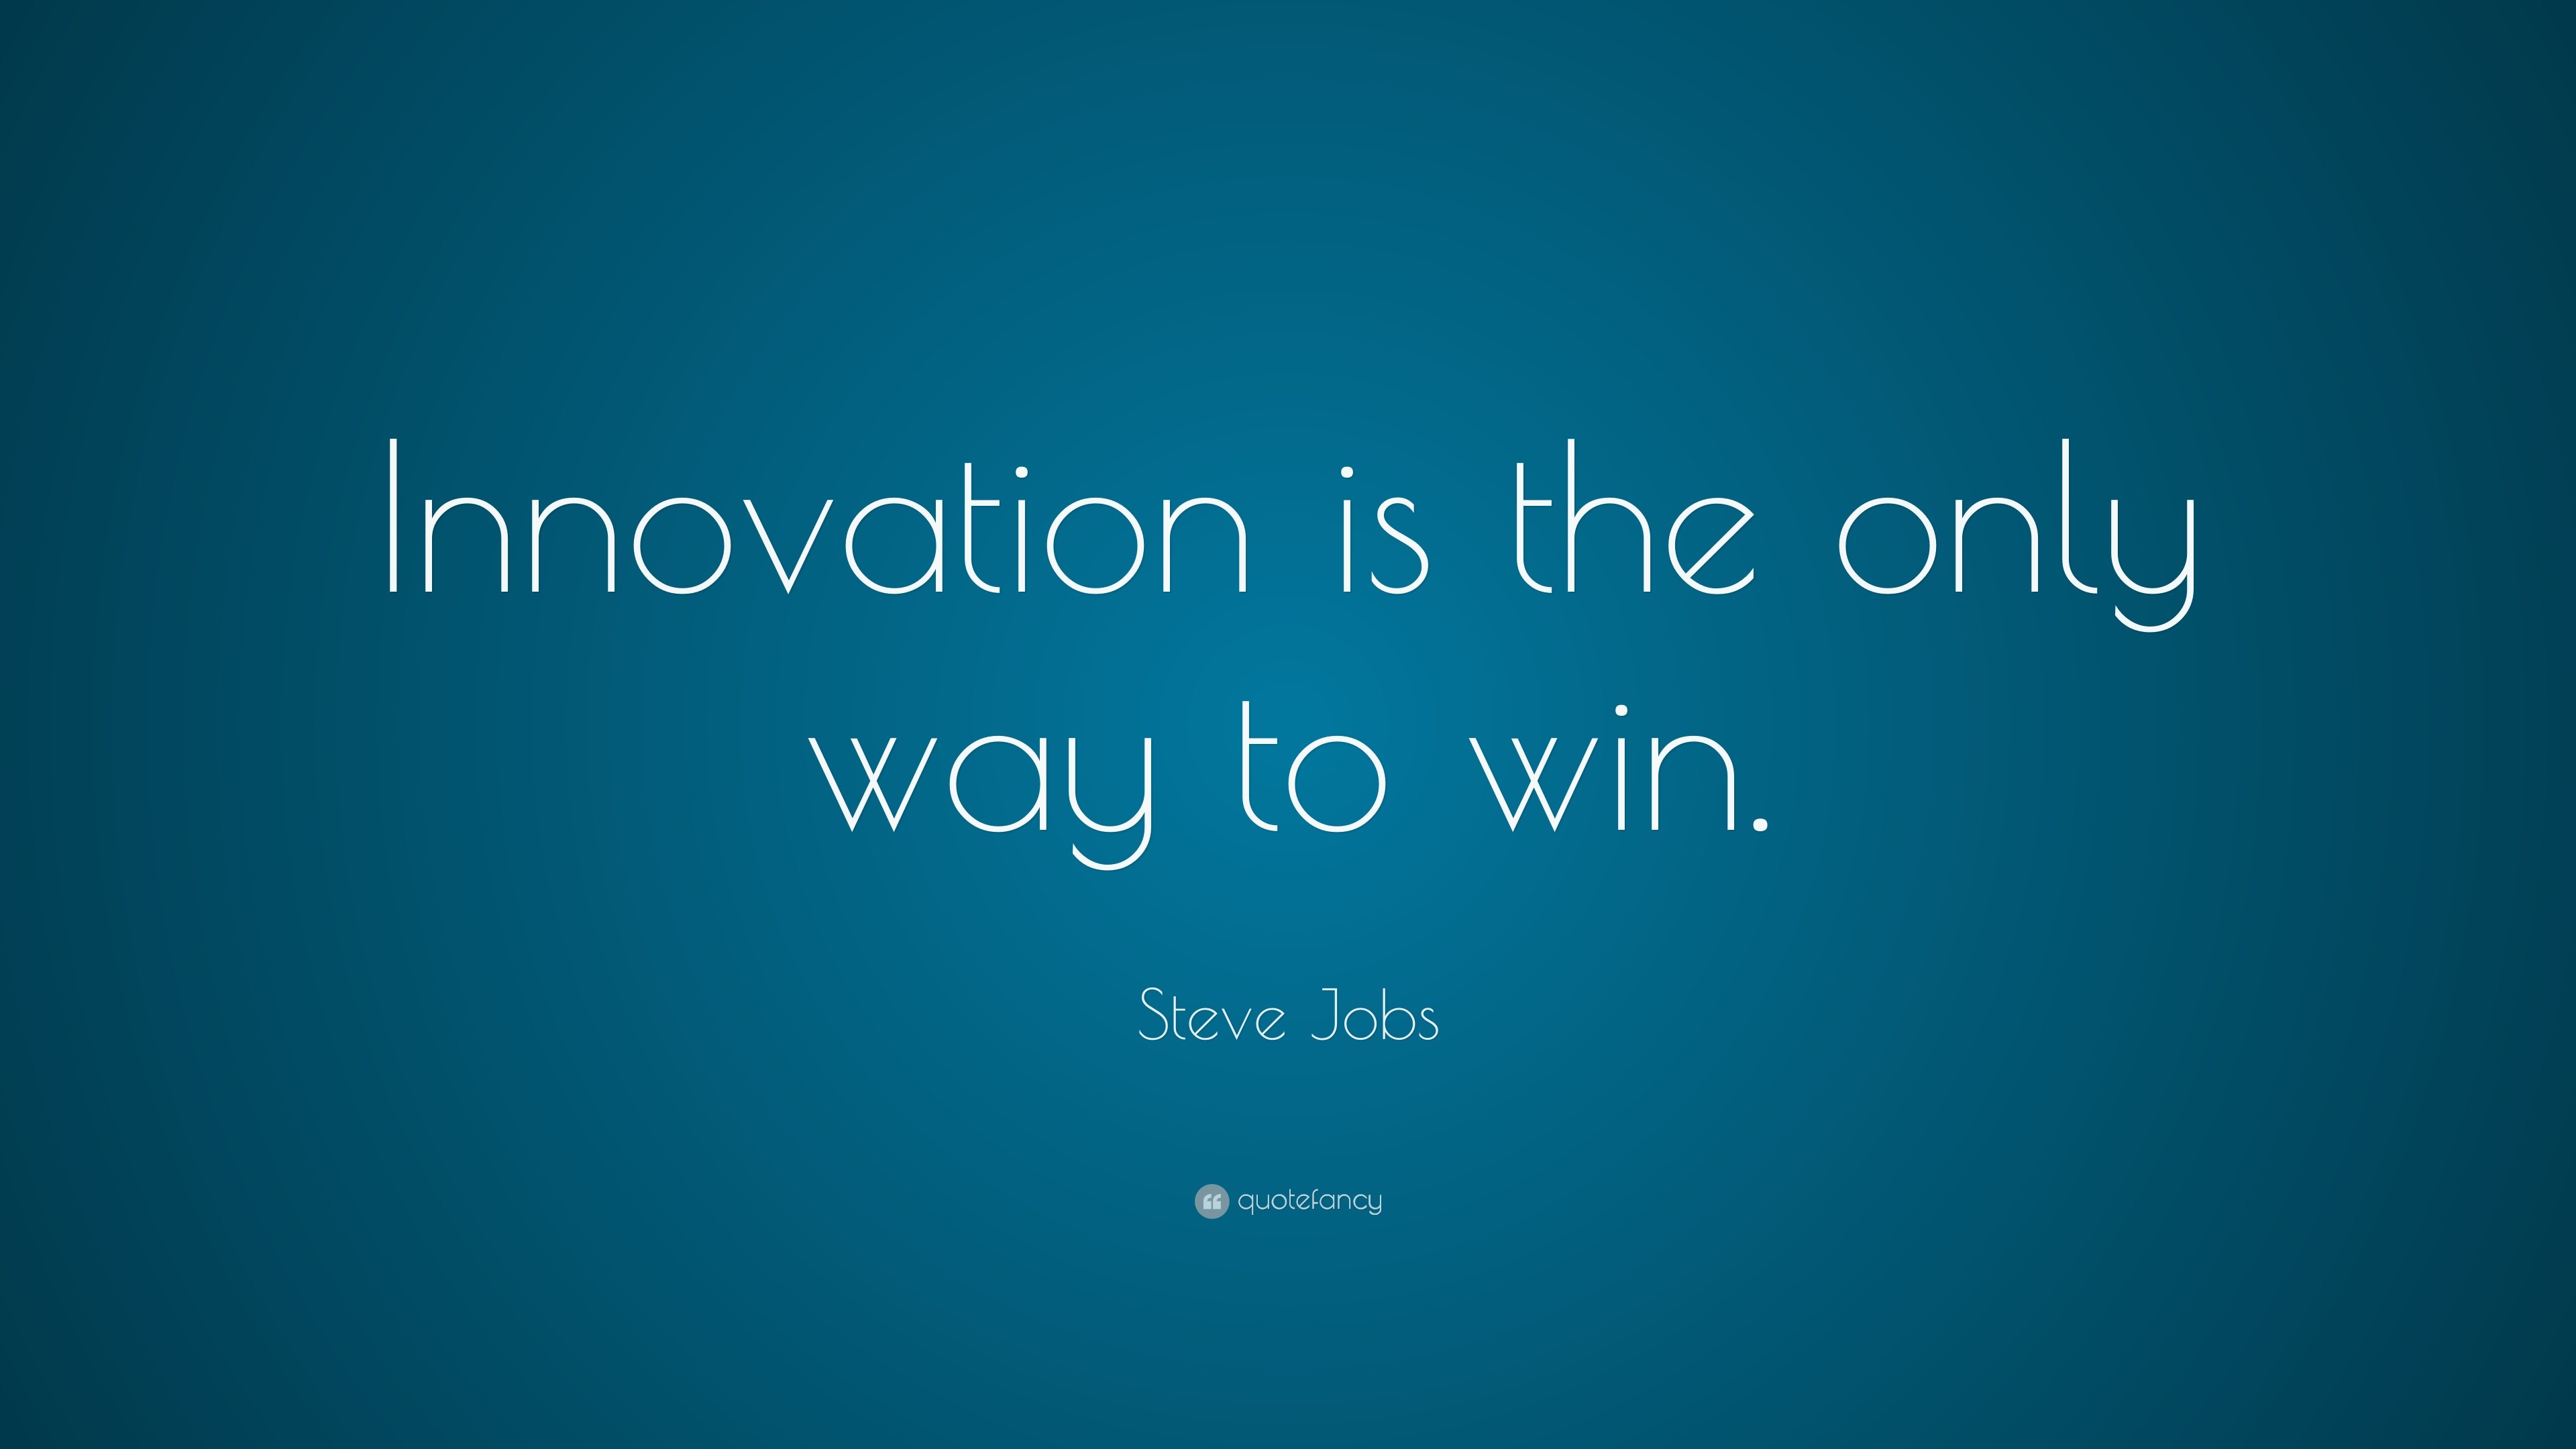 3840x2160 Steve Jobs Quote: “Innovation is the only way to win.”